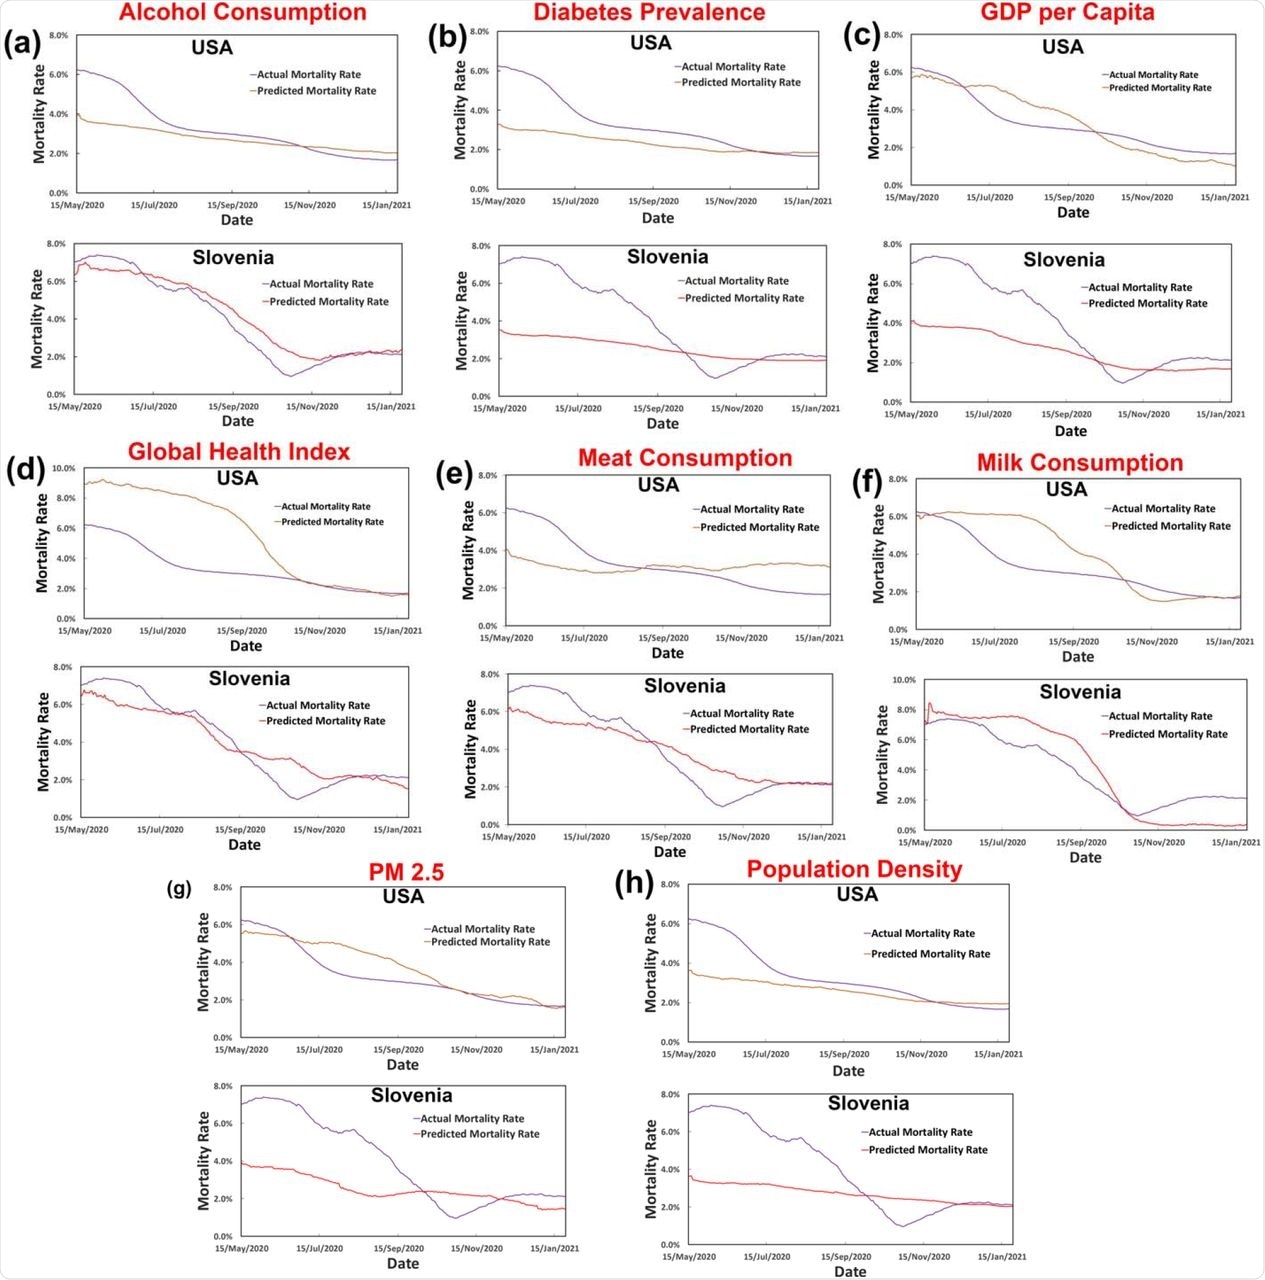 Prediction of COVID-19 related mortality rate using a single factor for both USA and Slovenia are shown, where the factors are – (a) alcohol consumption, (b) diabetes prevalence, (c) GDP per capita, (d) global health index, (e) meat consumption, (f) milk consumption, (g) PM 2.5 and (h) population density. None of the factors individually can describe the trend comprehensively.